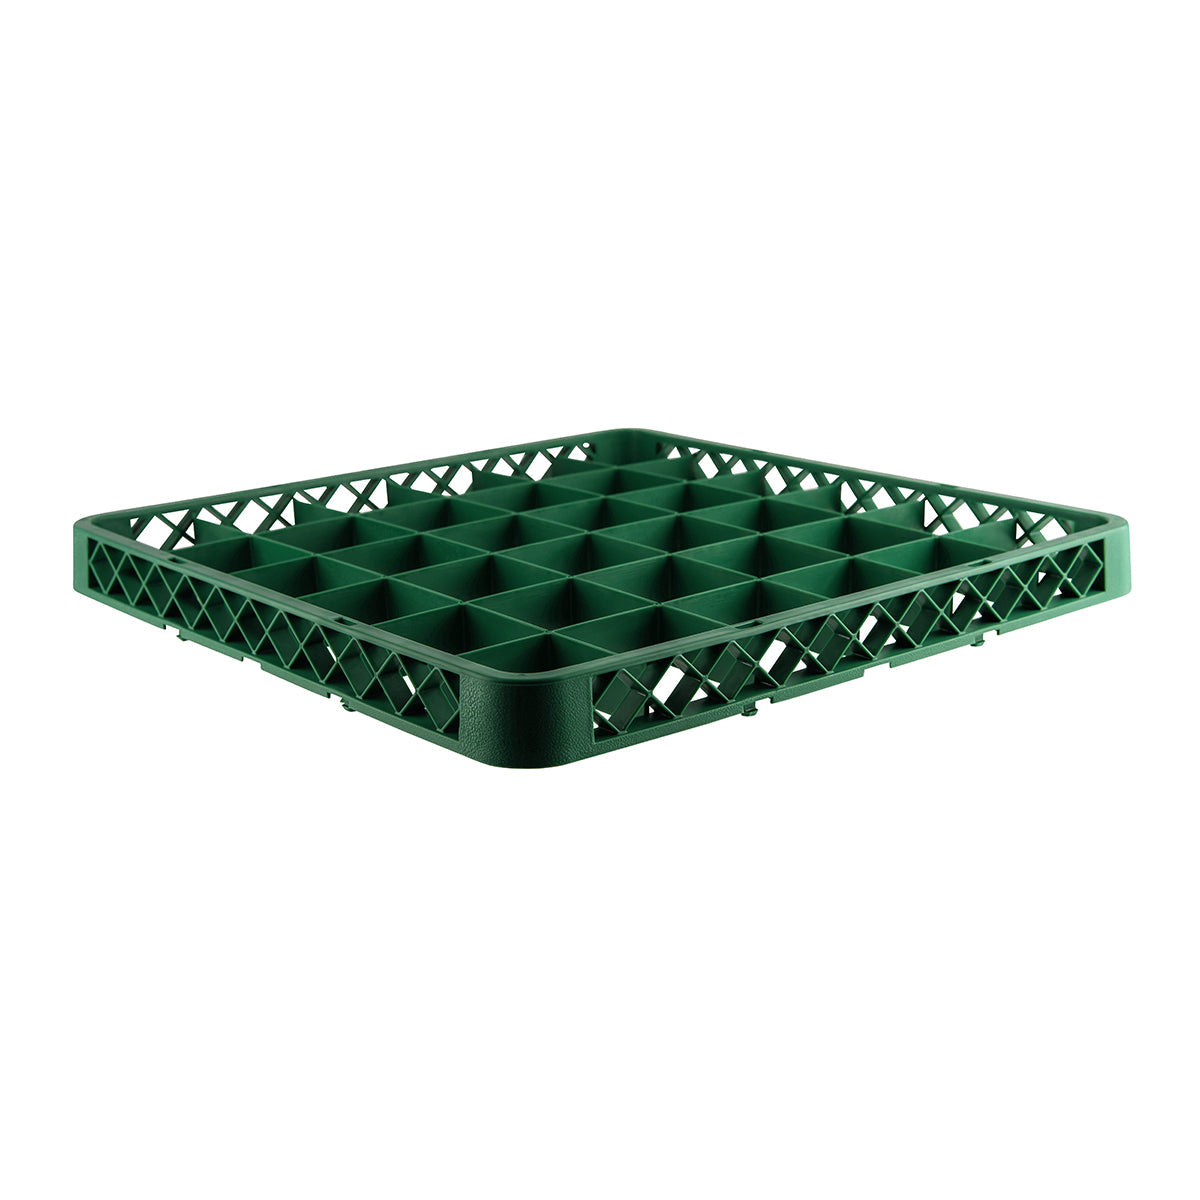 69837-GN Chef Inox Wash Rack Extender 36 Compartment Green 500x500x45mm Tomkin Australia Hospitality Supplies